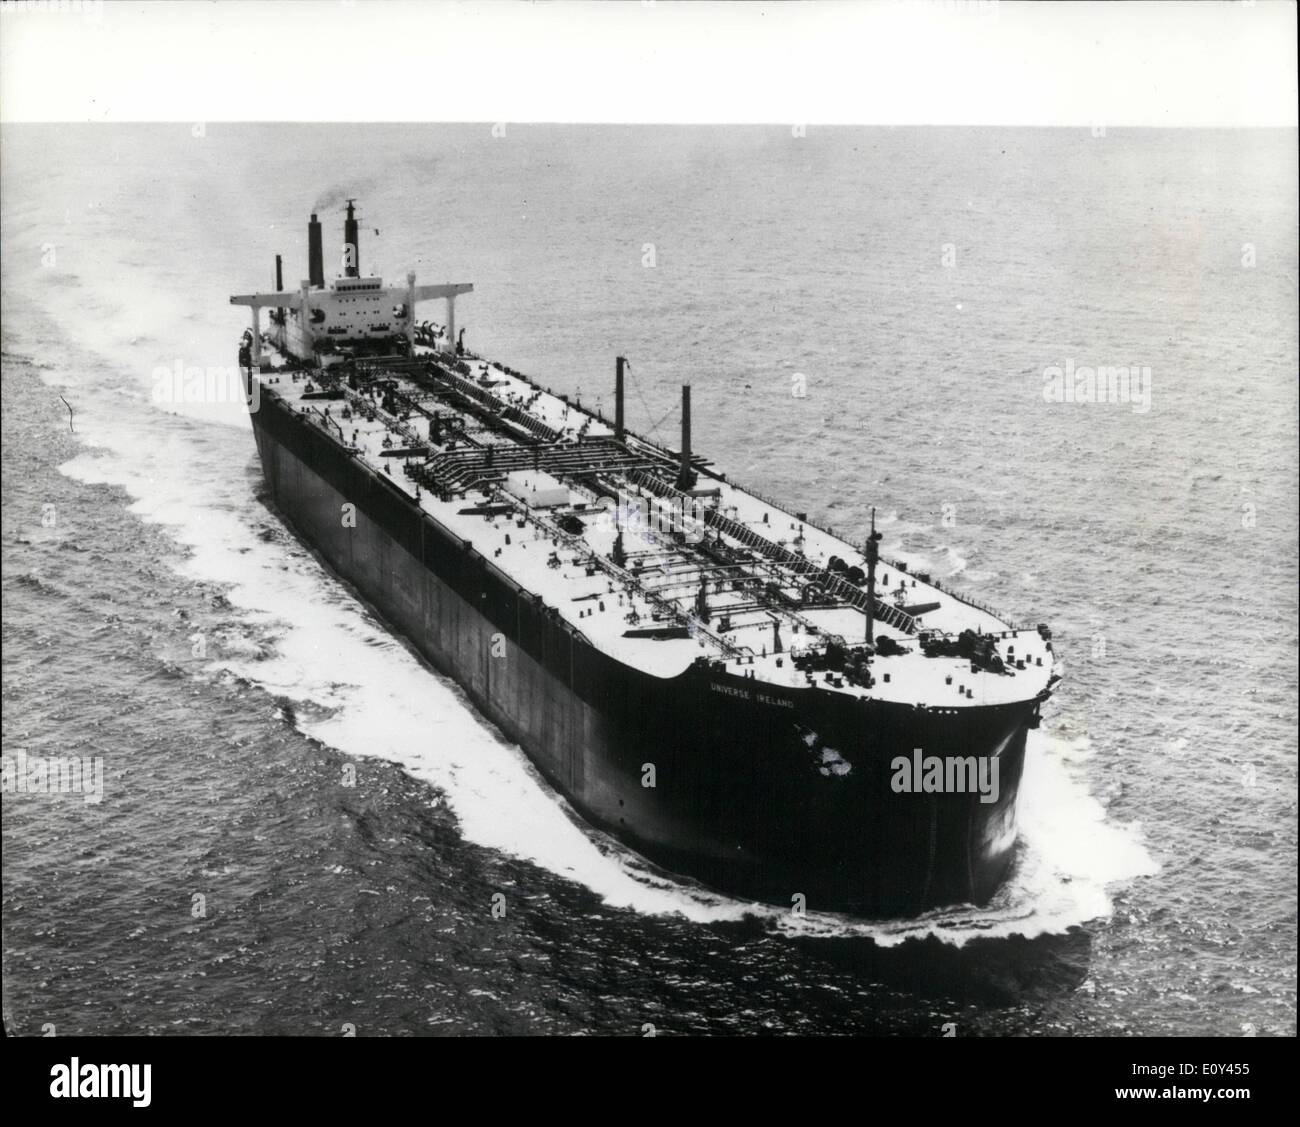 Jul. 07, 1968 - TRIAL RUN FOR WORLD'S BIGGEST SHIP: The 312,000-DWT tanker Universe Ireland, is shown undergoing sea trials in Sagami Bay about 60 kms south of Tokyo, before beig christened by Mrs. John H. Lynch, wife of the Prime Minister of Ireland at Yokohama on August 15th. 1968. The huge tanker which can carry 400,000 cubic meters of oil, is 346 meters long, and was built by the Ishikawajima-Harima and Mitsubishi Heavy Industries for the National Bulk Carriers on behalf of the Gulf Oil Corp; who have ordered six tankers of the same size, and will run from Kuwait to Bantry Bay, Ireland. Stock Photo